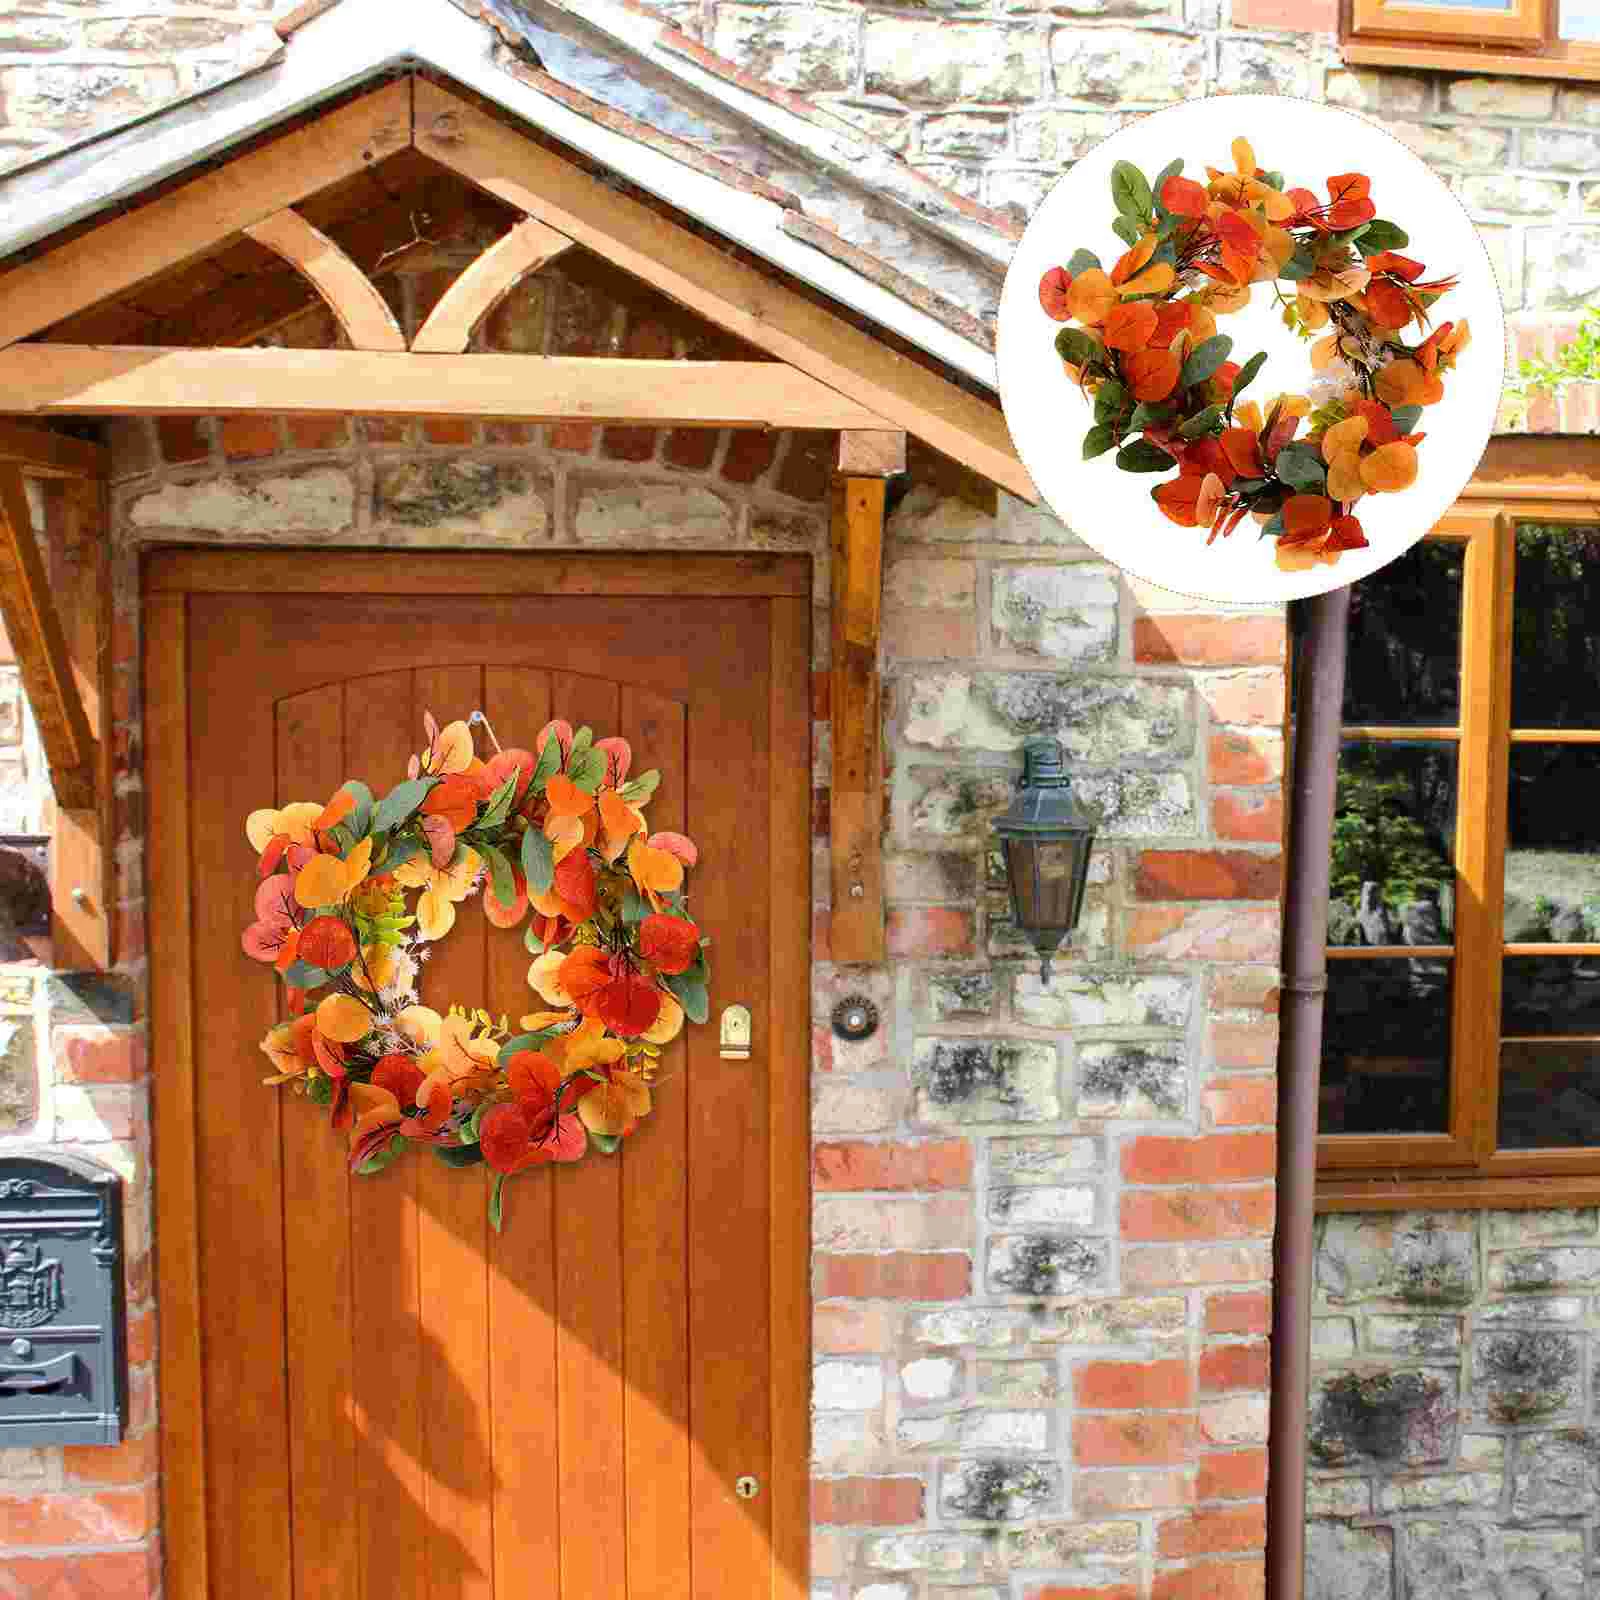 

Wreath Door Eucalyptus Garland Artificial Hanging Fall Leaf Front Leaves Thanksgiving Autumn Decorative Festival Wreaths Outdoor